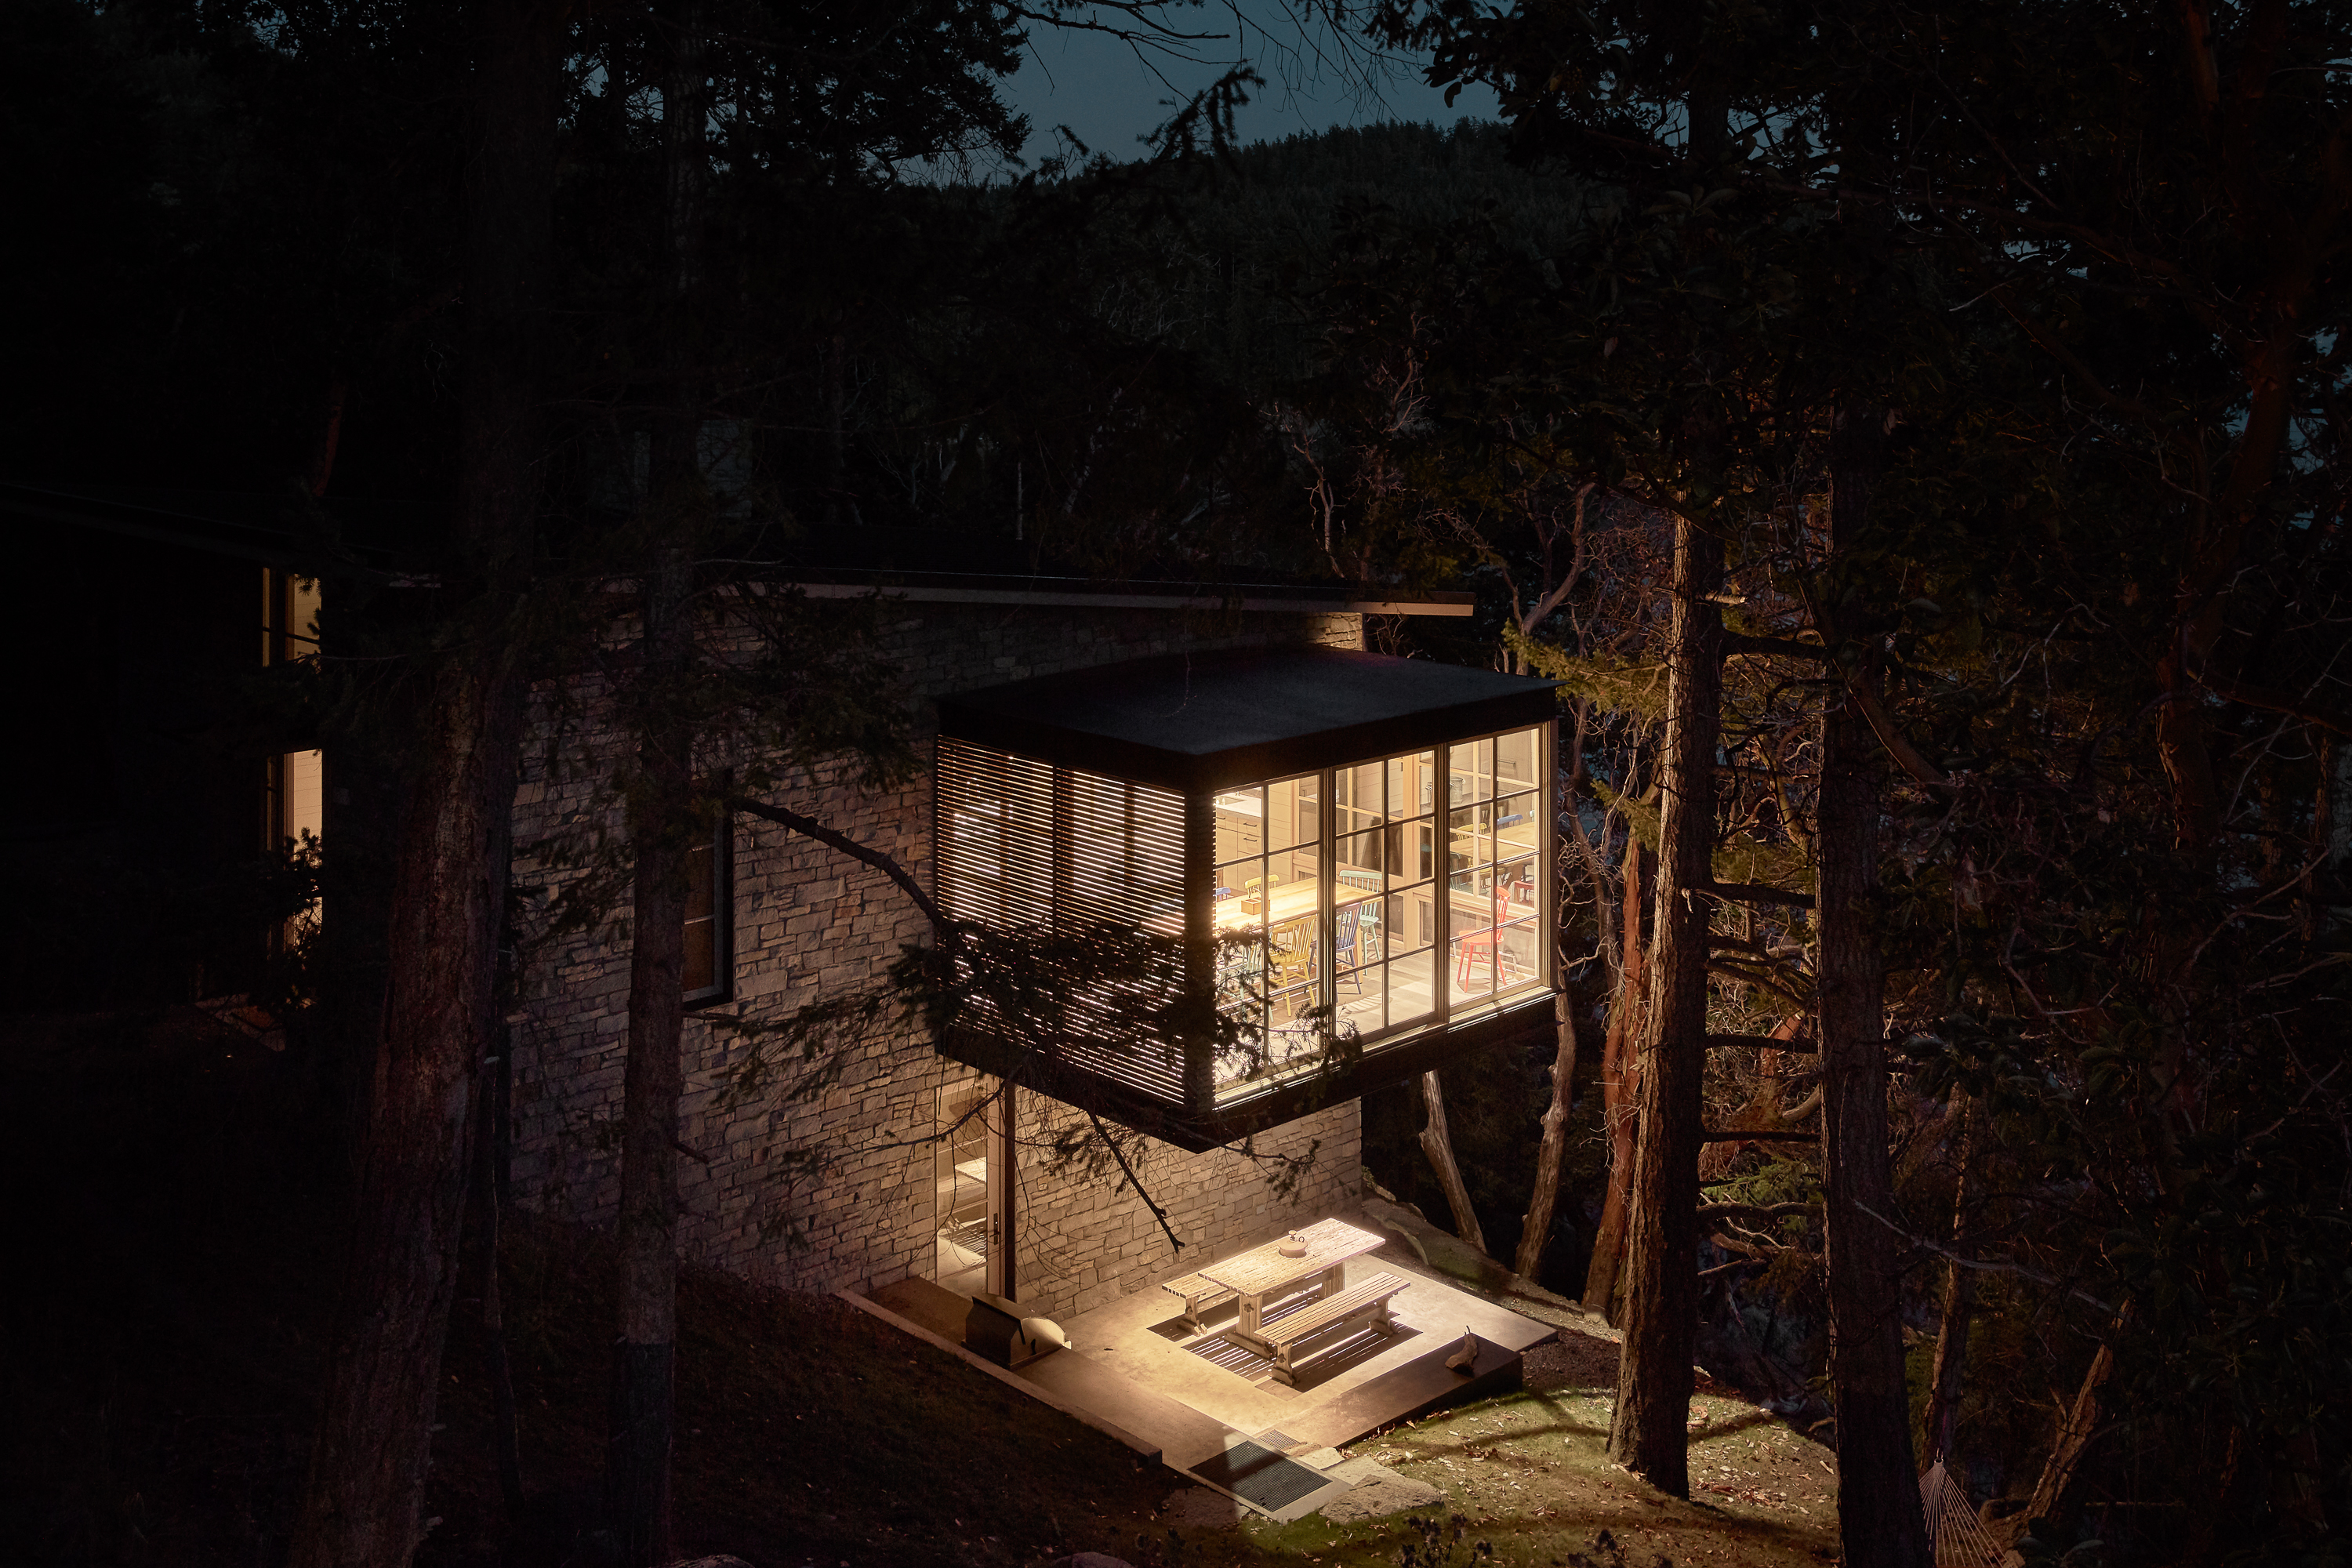 The house glows warmly from within, highlighting the cantilevered dining room that seemingly floats among the trees, creating a magical evening ambiance.